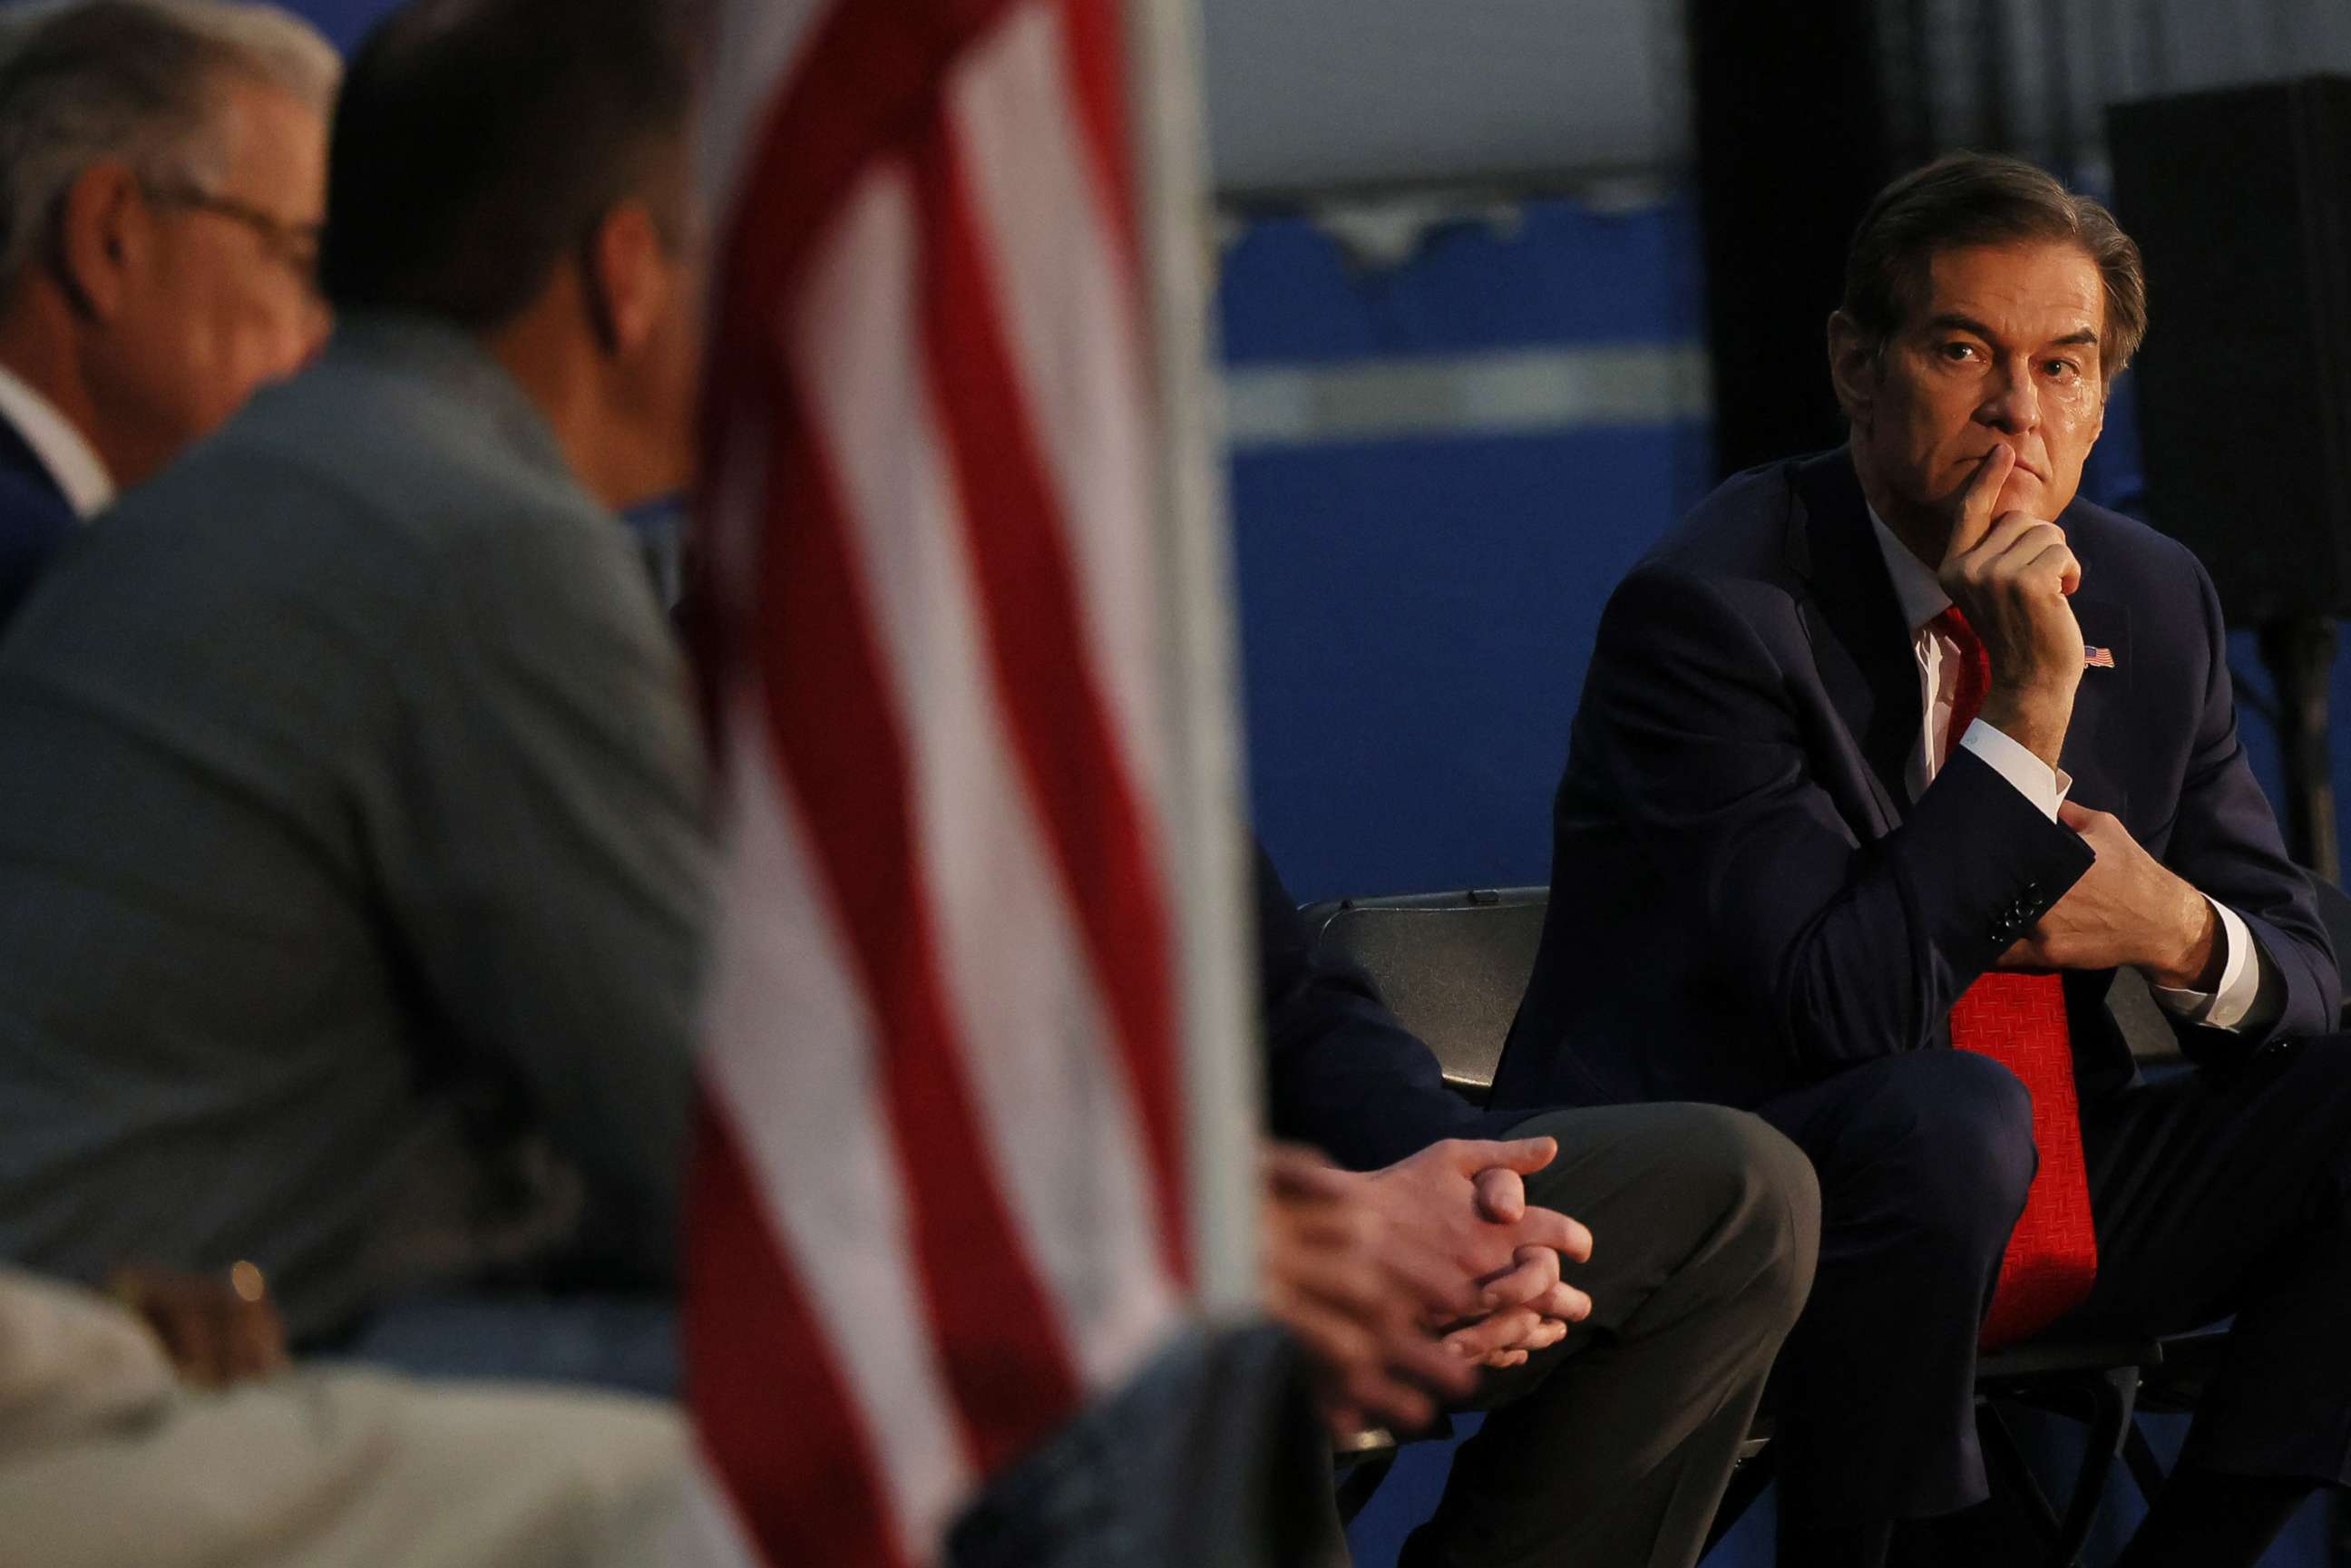 PHOTO: Pennsylvania U.S. Senate candidate Dr. Mehmet Oz looks over at other candidates during a Republican leadership forum in Newtown, Pa., May 11, 2022.